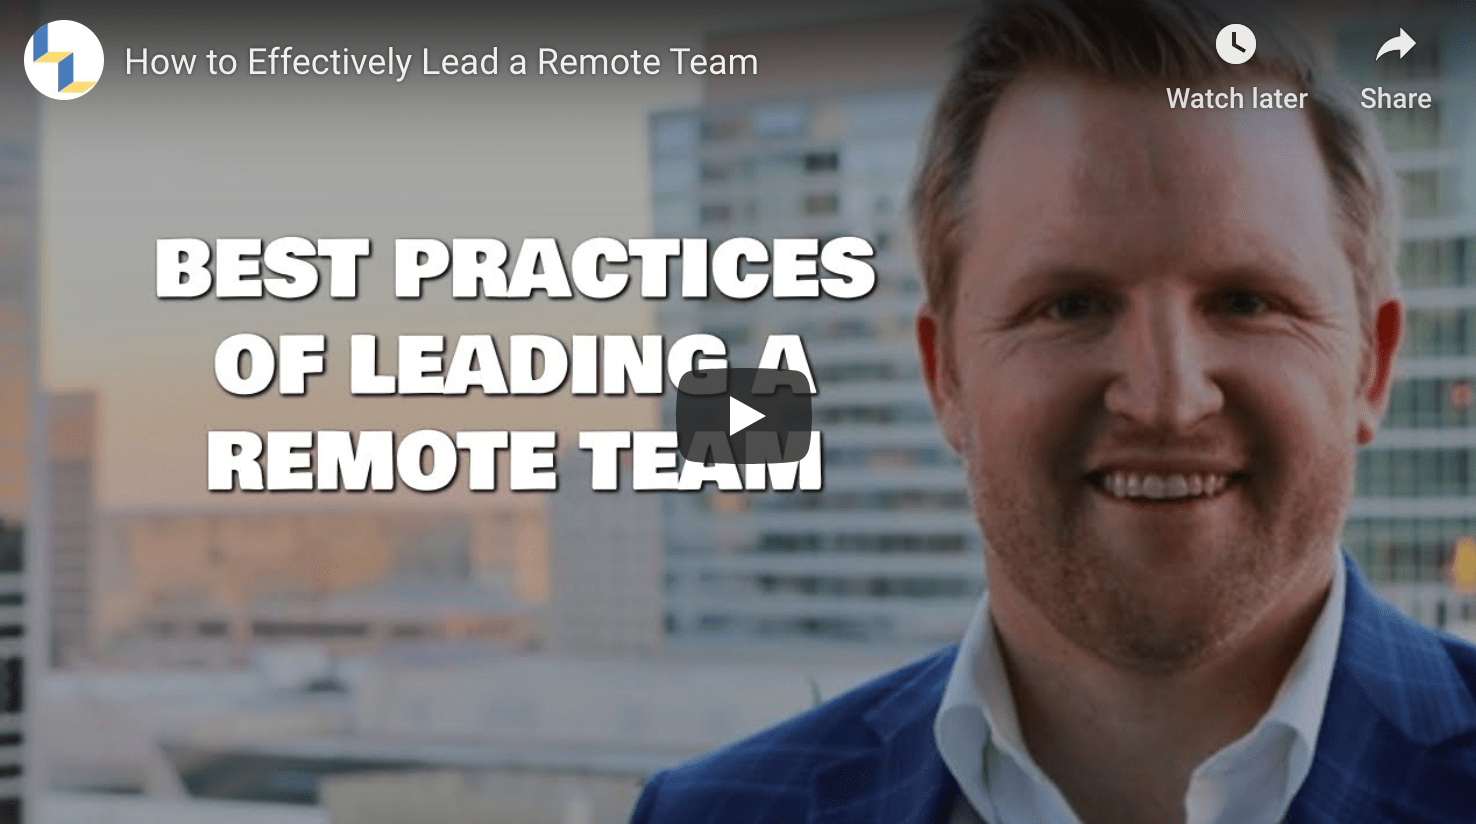 How to Effectively Lead a Remote Team